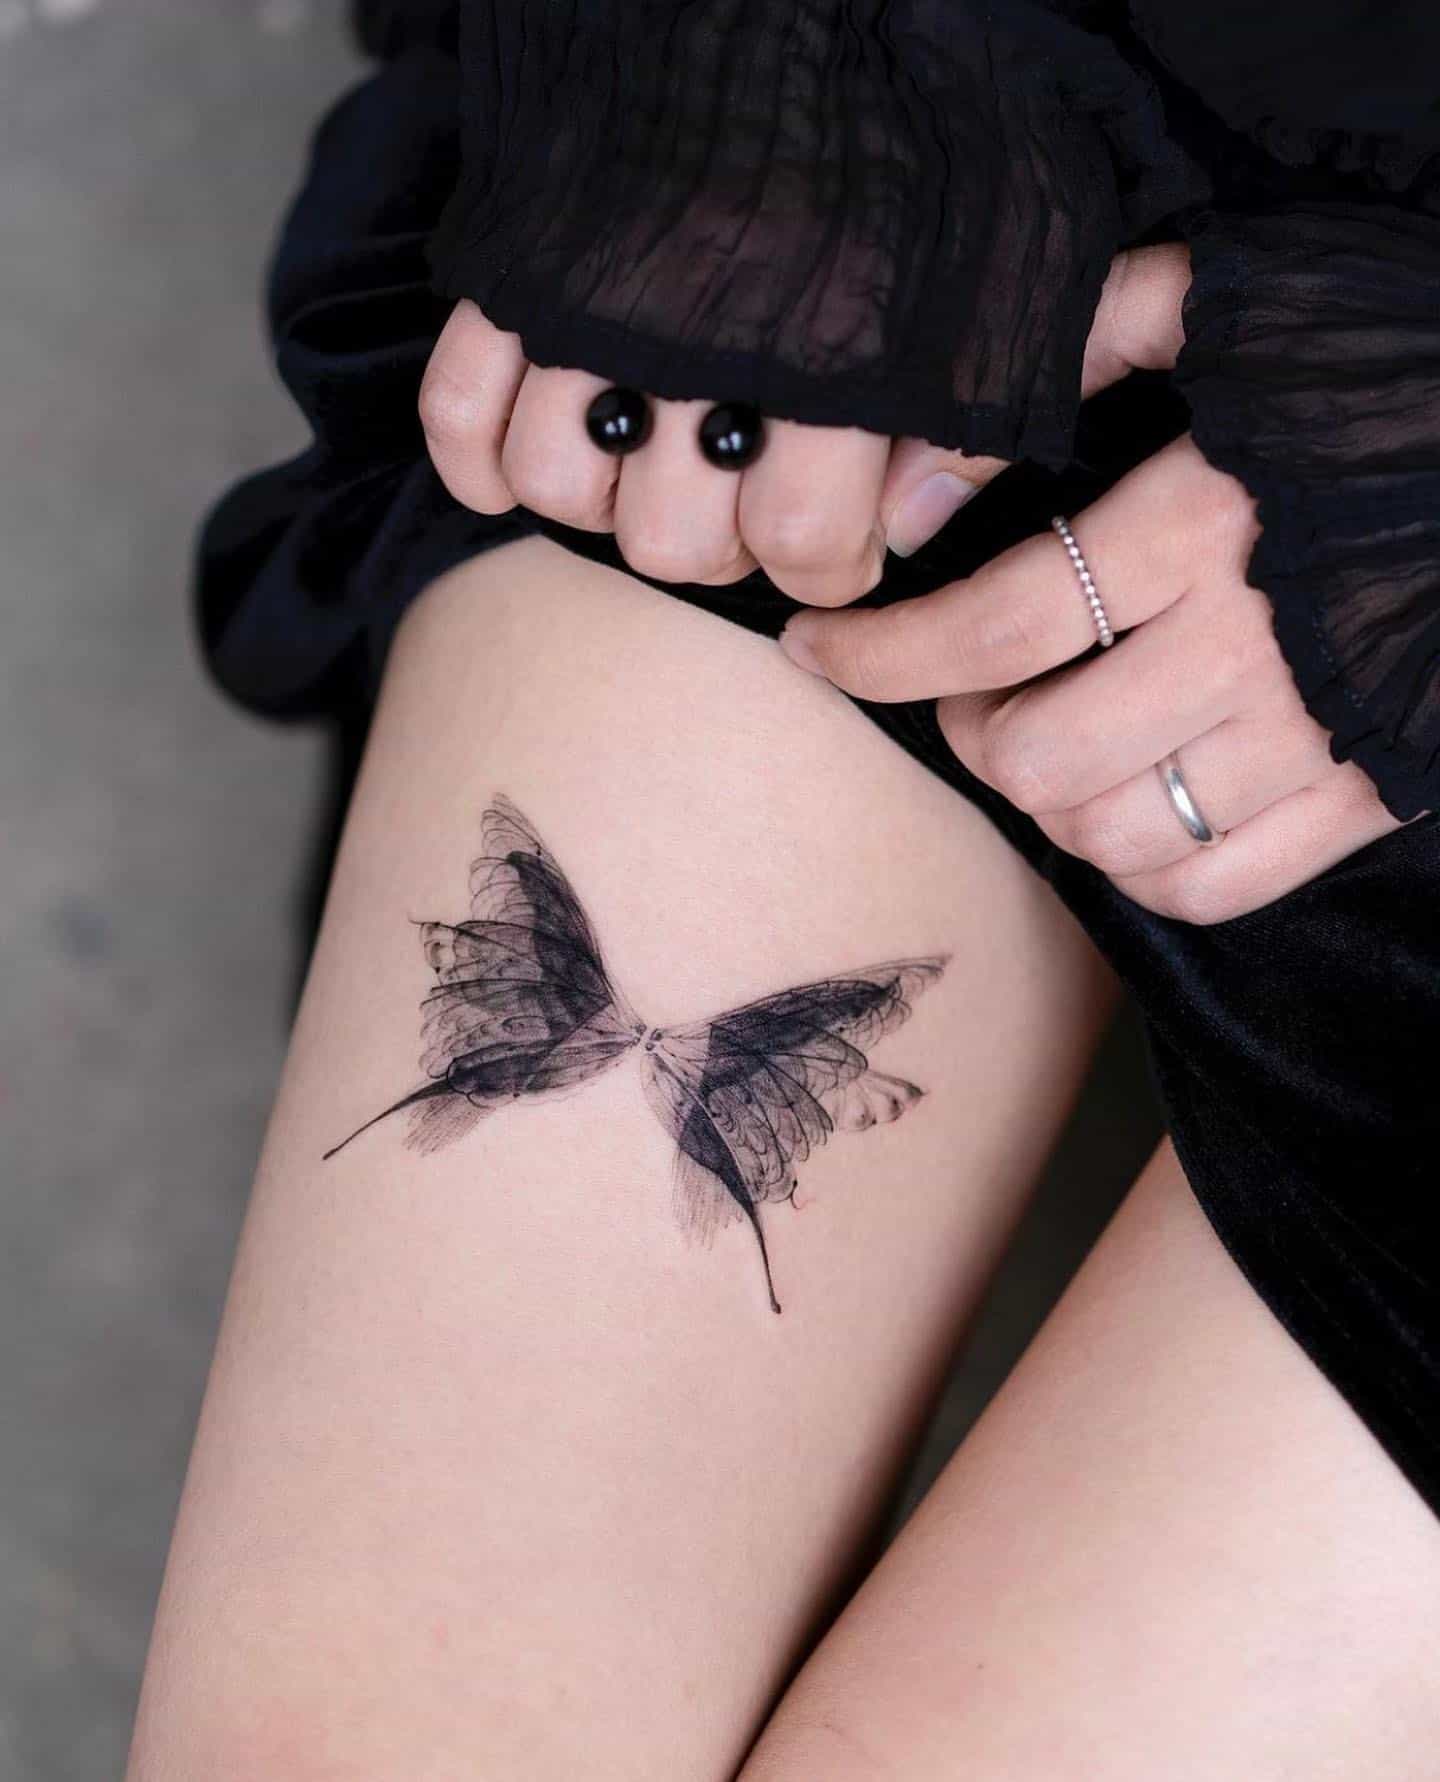 30 Awesome Butterfly Thigh Tattoo Ideas for Men & Women in 2023